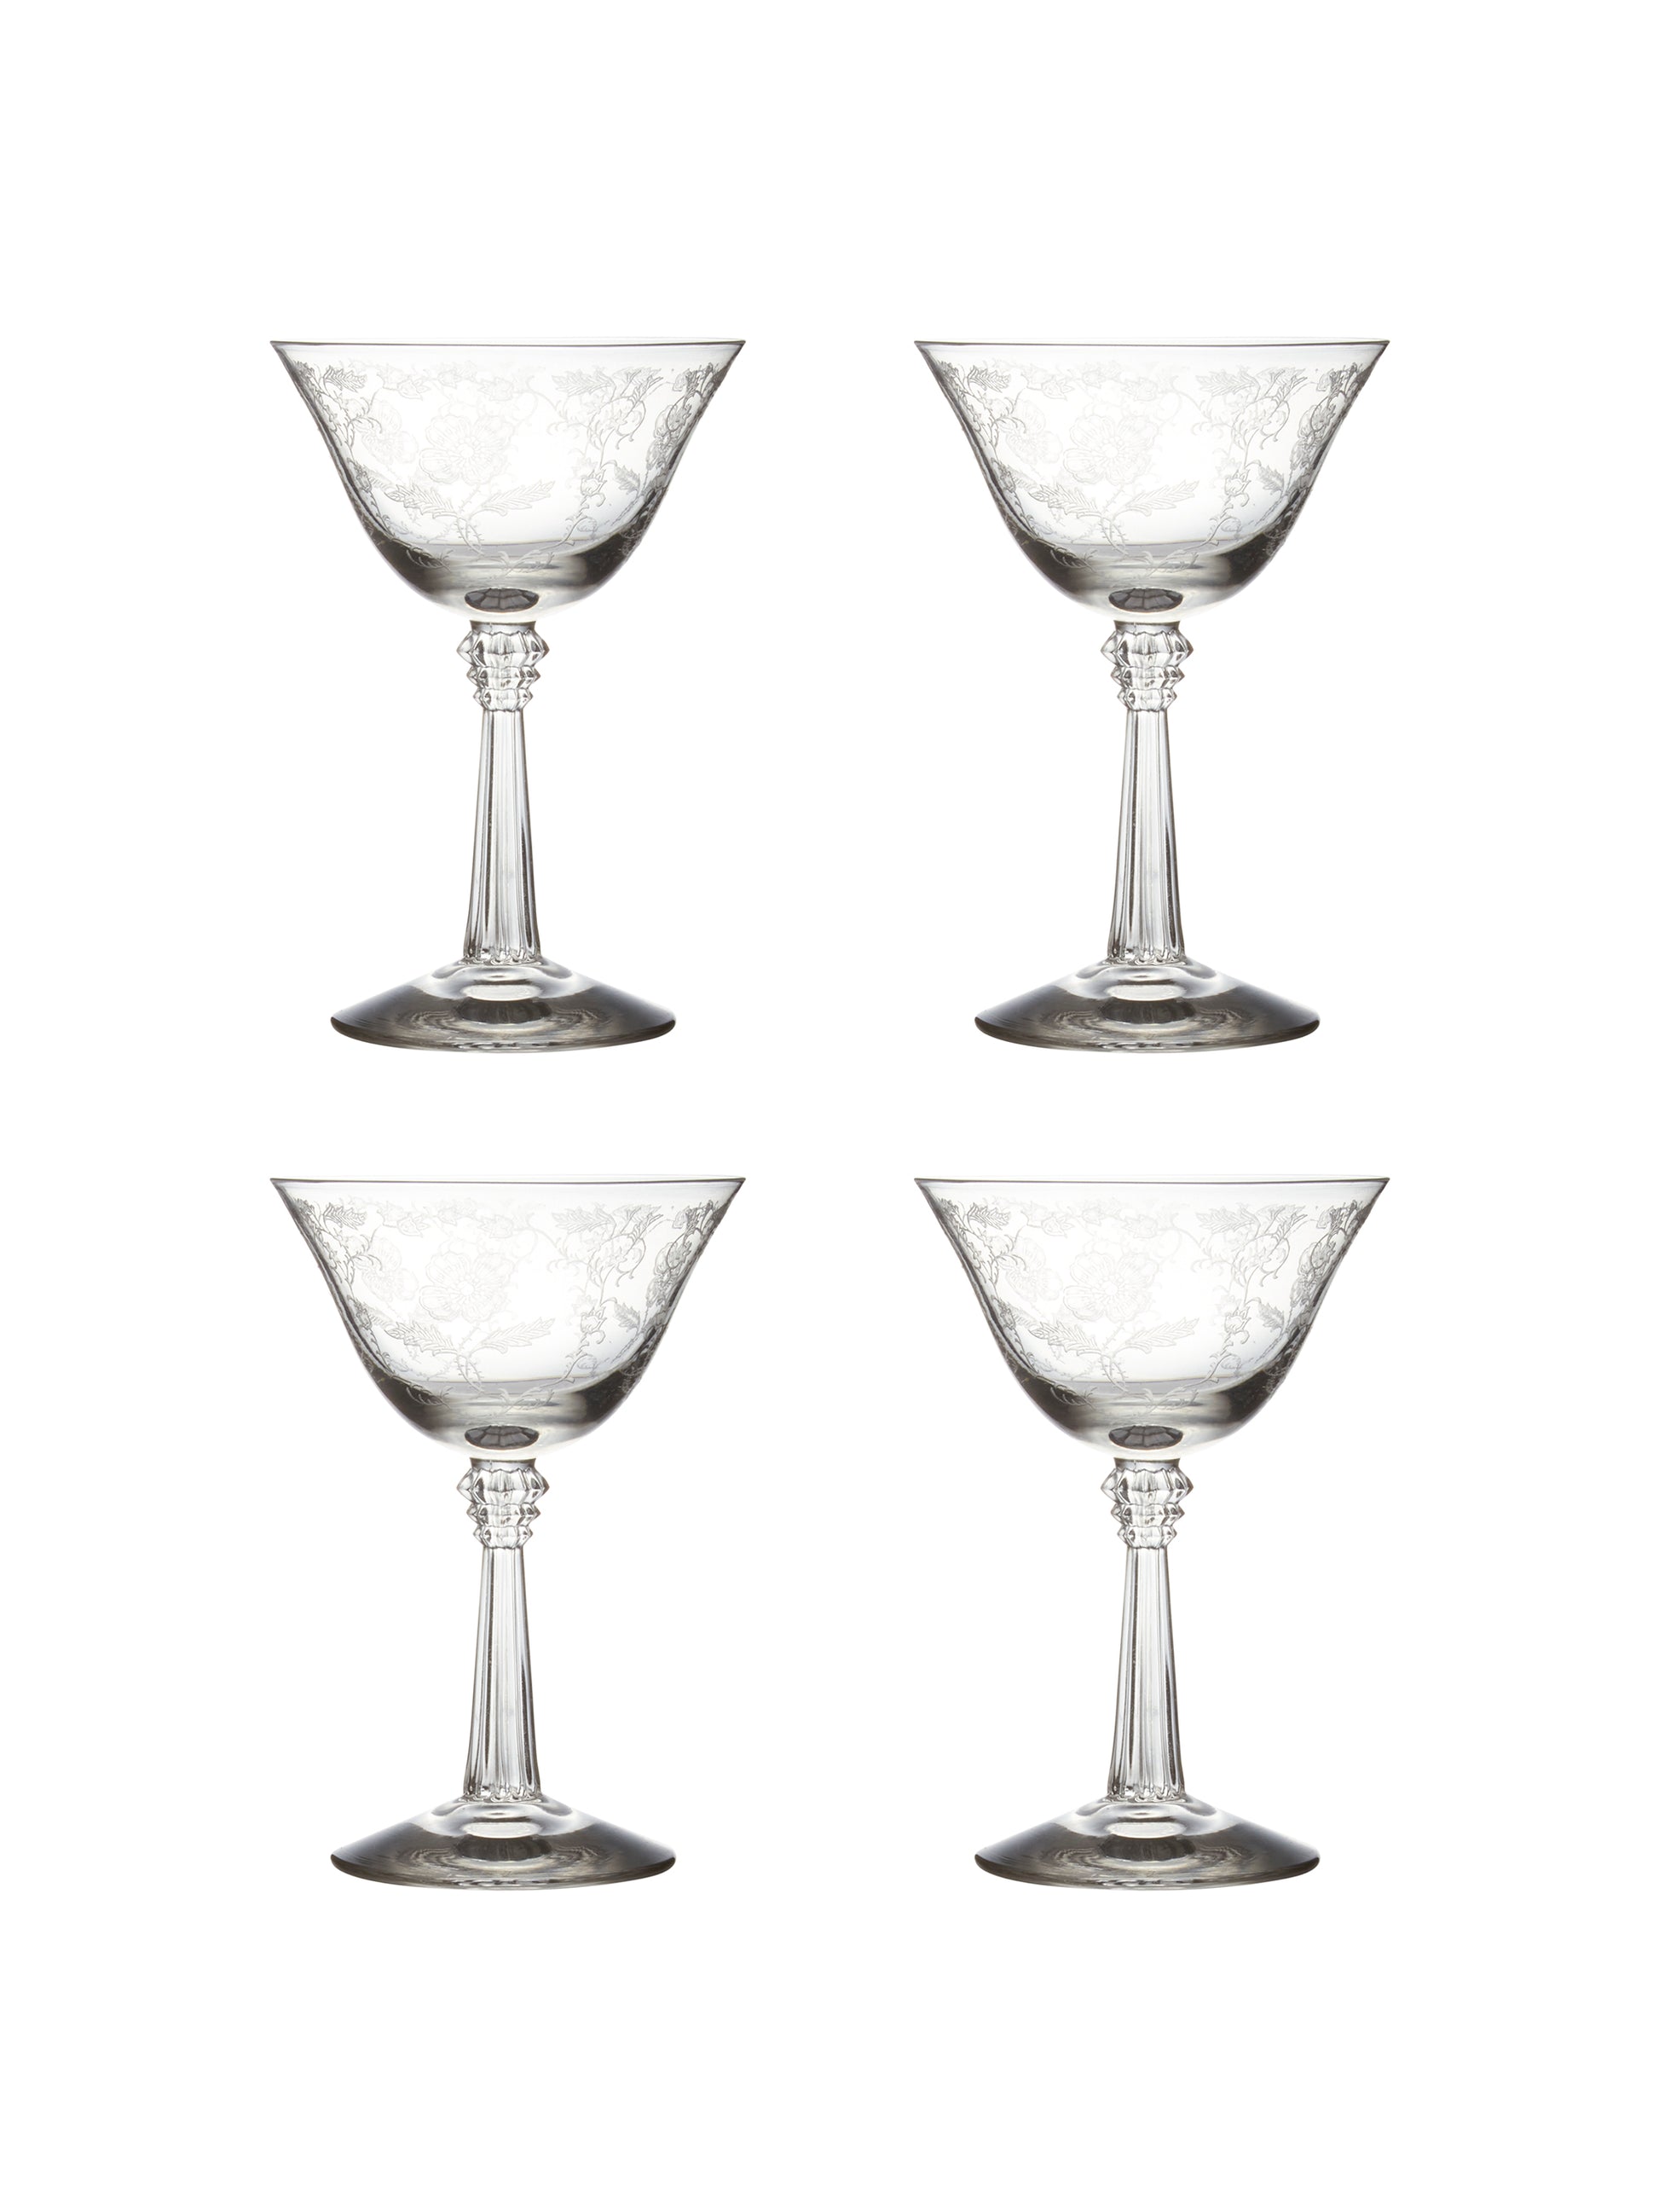 Shop the Vintage 1950s Etched Beer Glasses at Weston Table